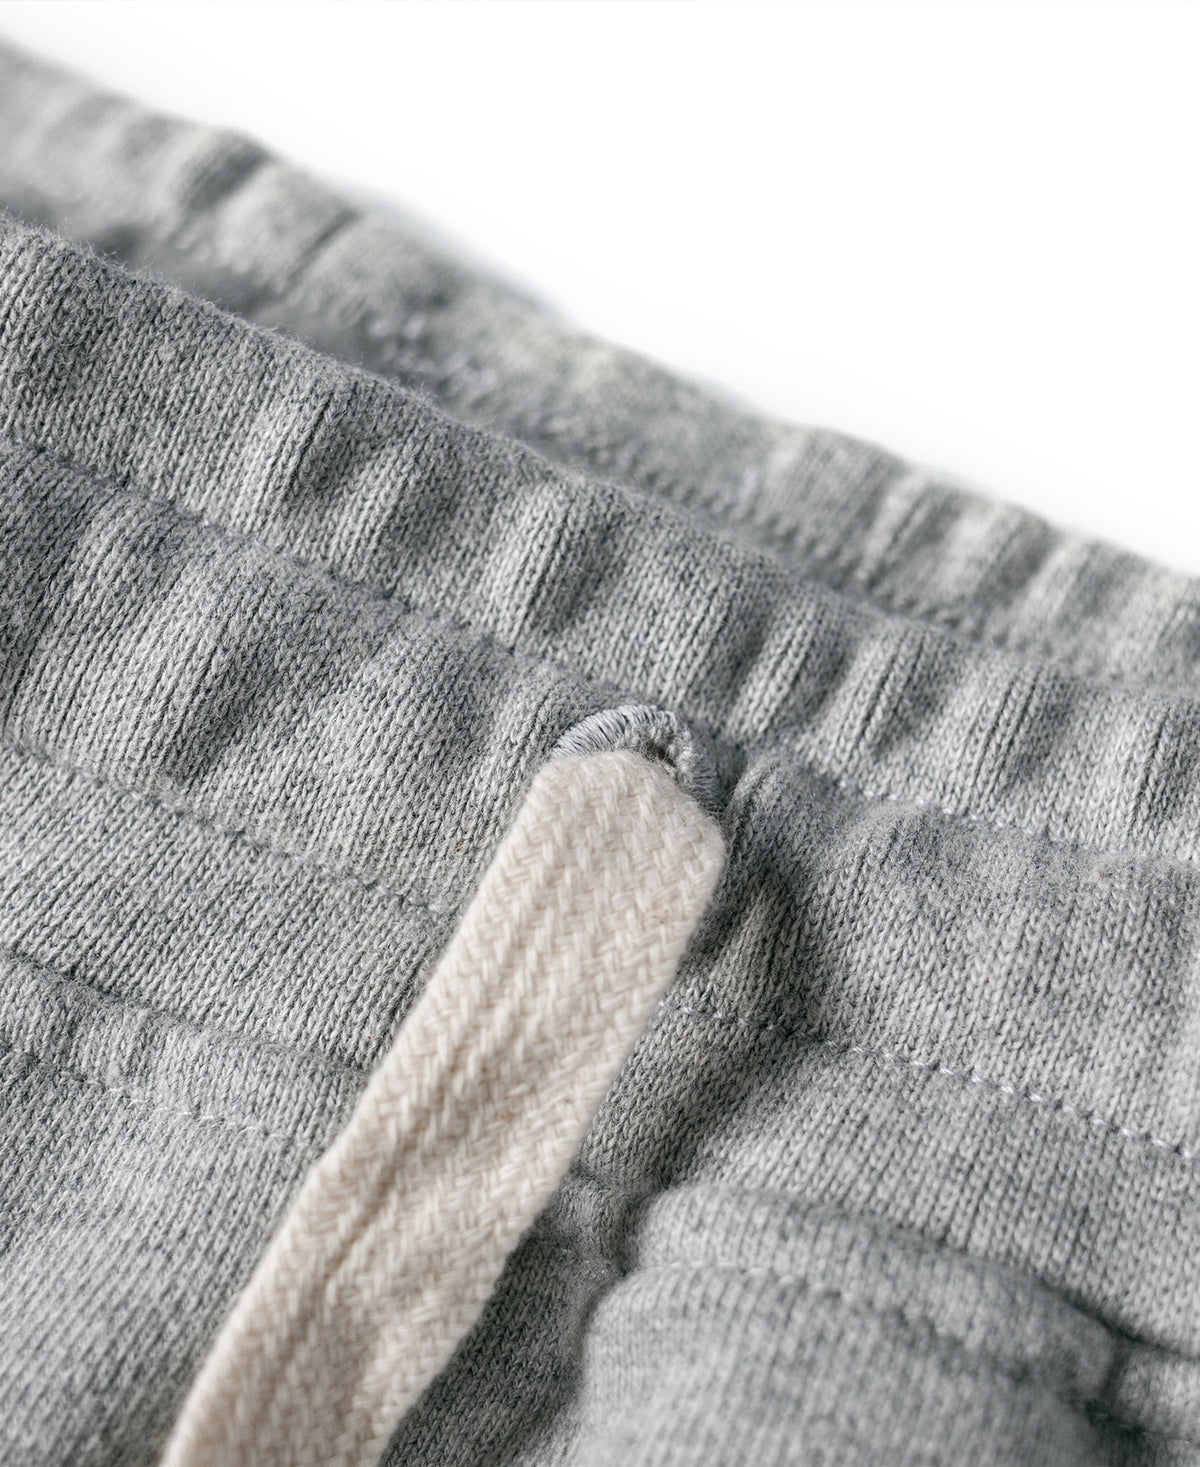 15 oz French Terry Sweat Shorts - Gray